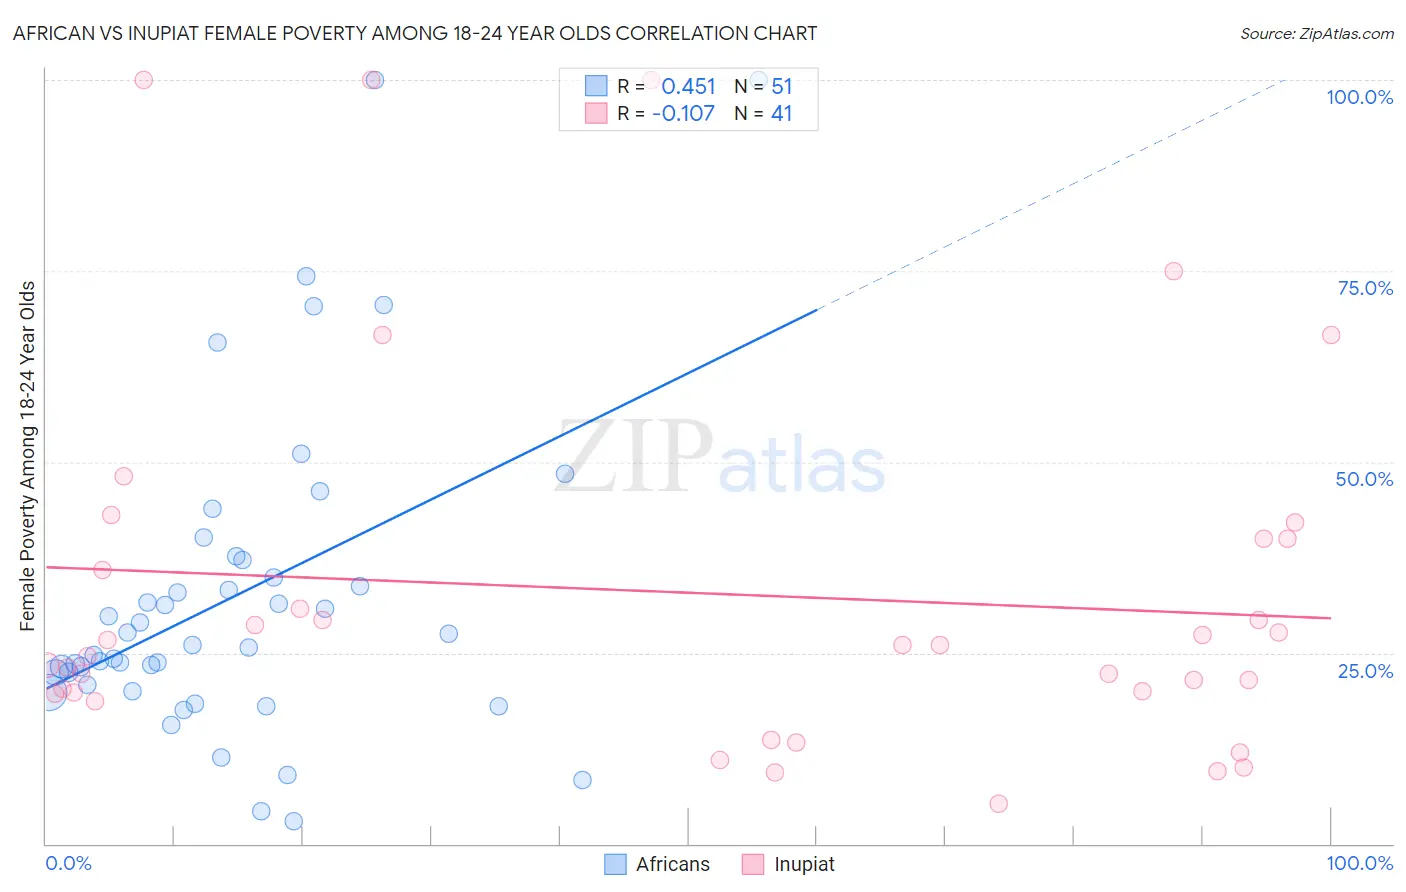 African vs Inupiat Female Poverty Among 18-24 Year Olds